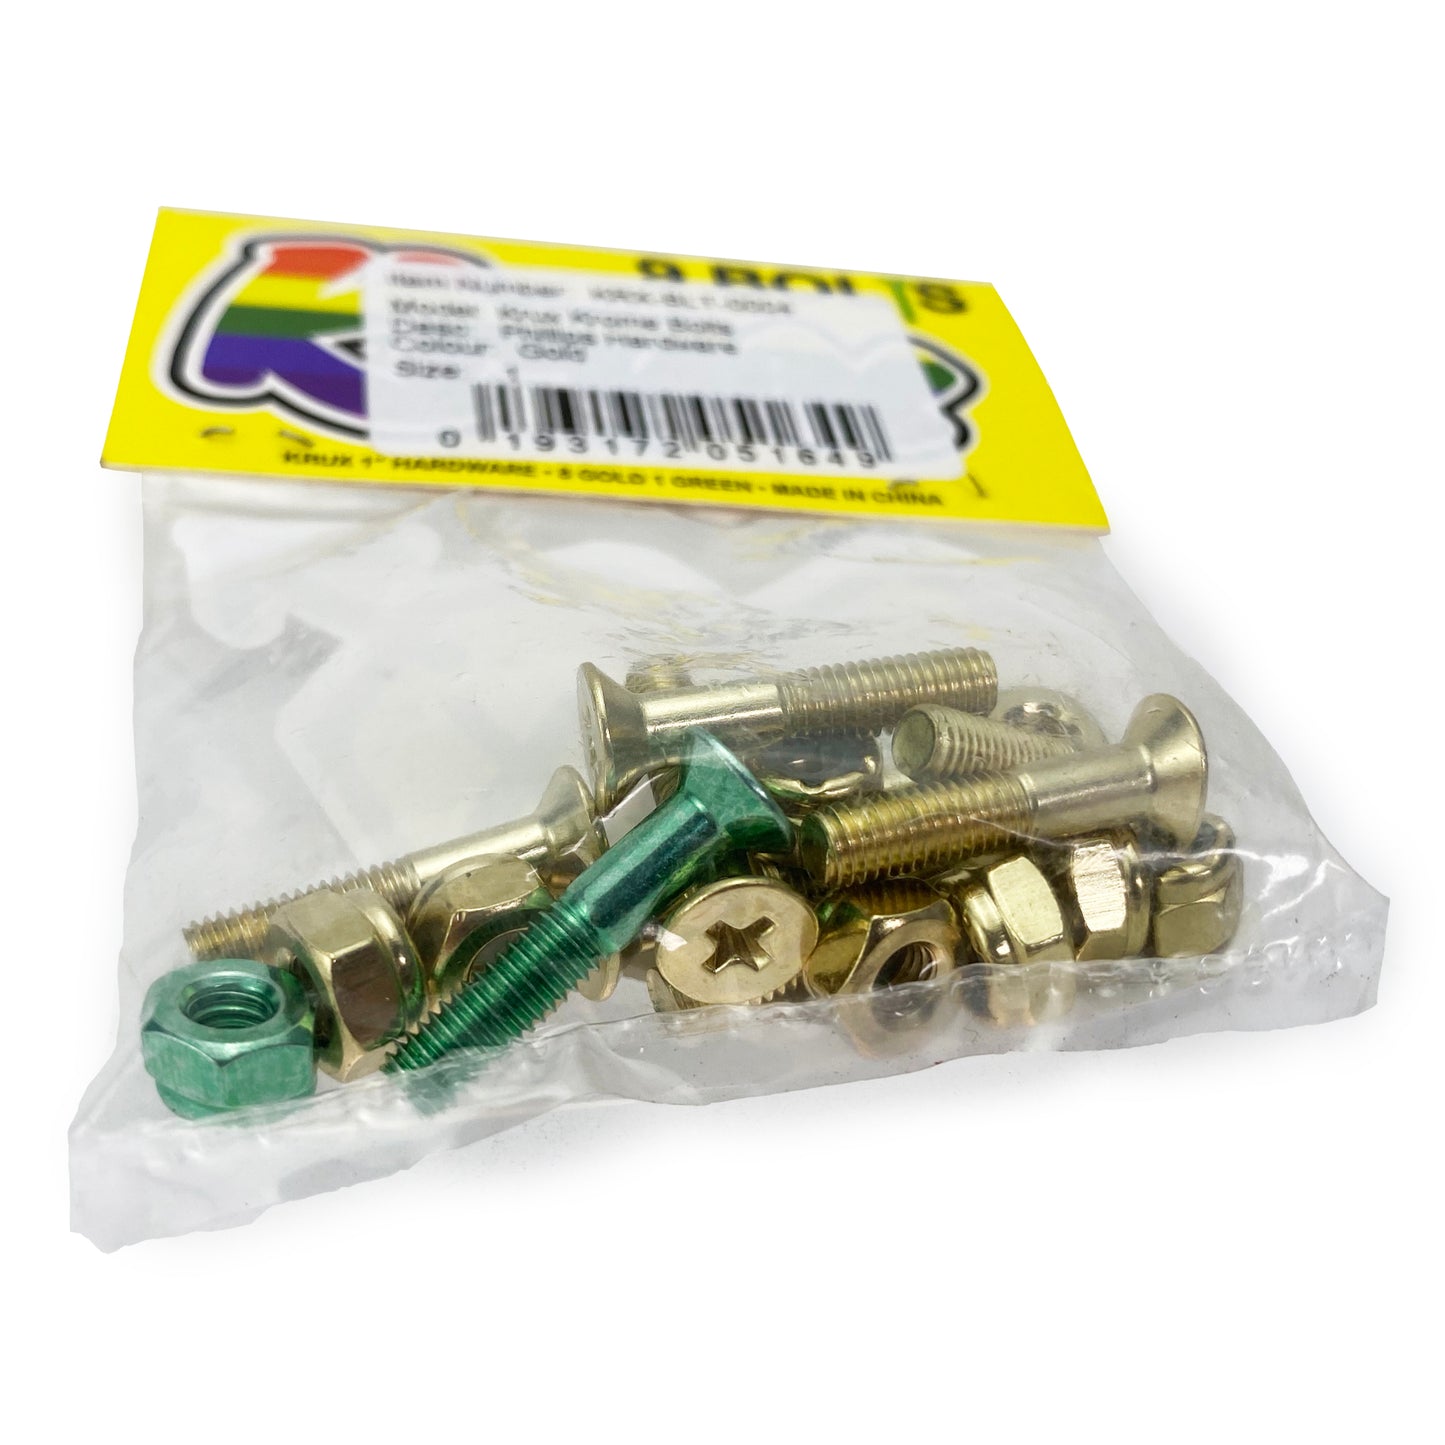 Krux Phillips Truck Bolts 1" - Gold / Green - Prime Delux Store